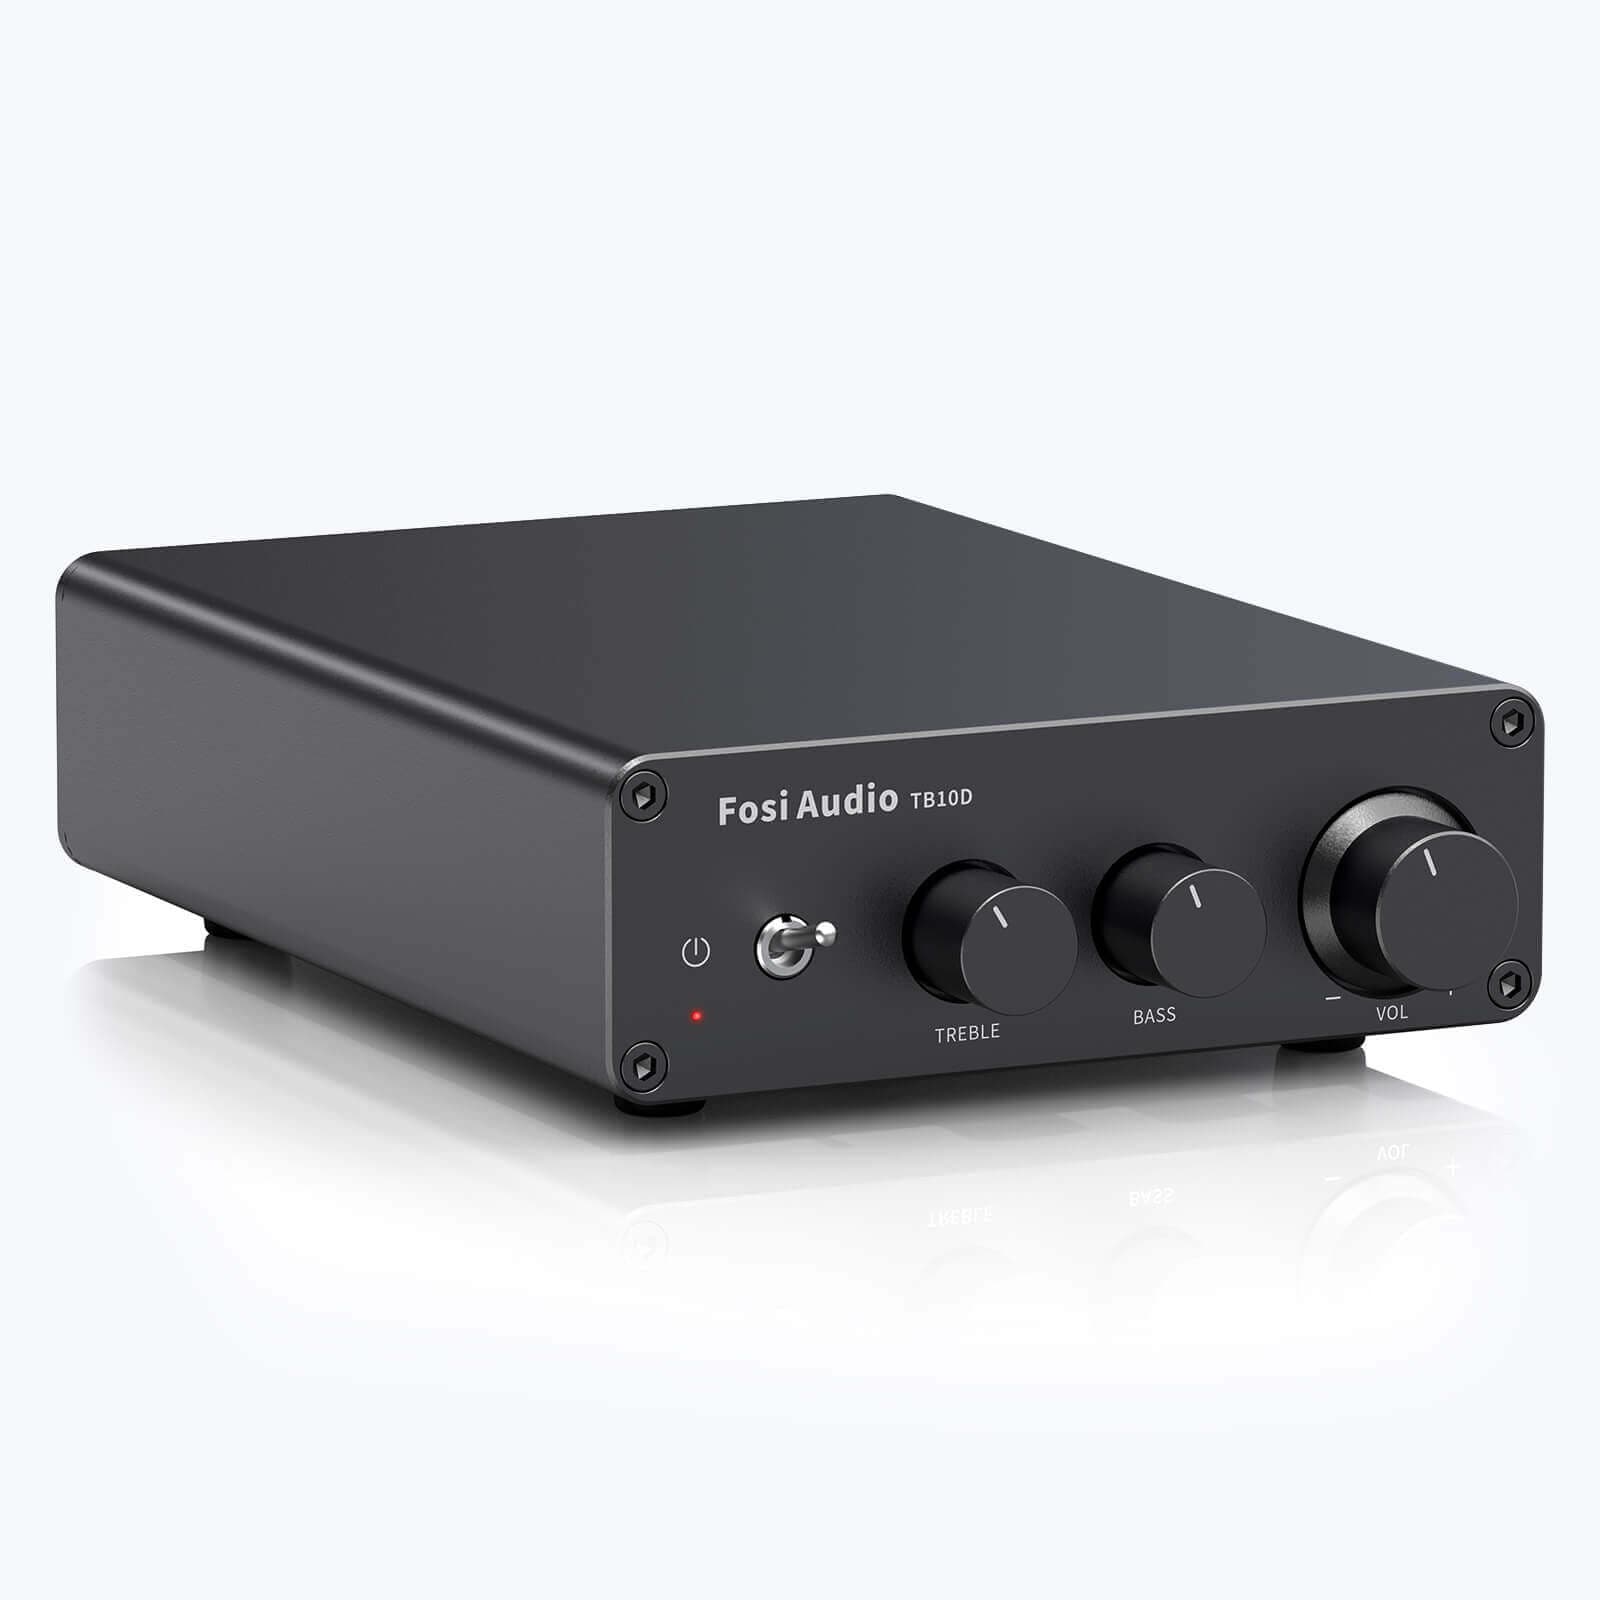 [Upgraded Version] Fosi Audio TB10D TPA3255 Power Amplifier 300Wx2 HiFi Digital Stereo Audio Amp 2.0 Channel Amplifier with Bass and Treble Control